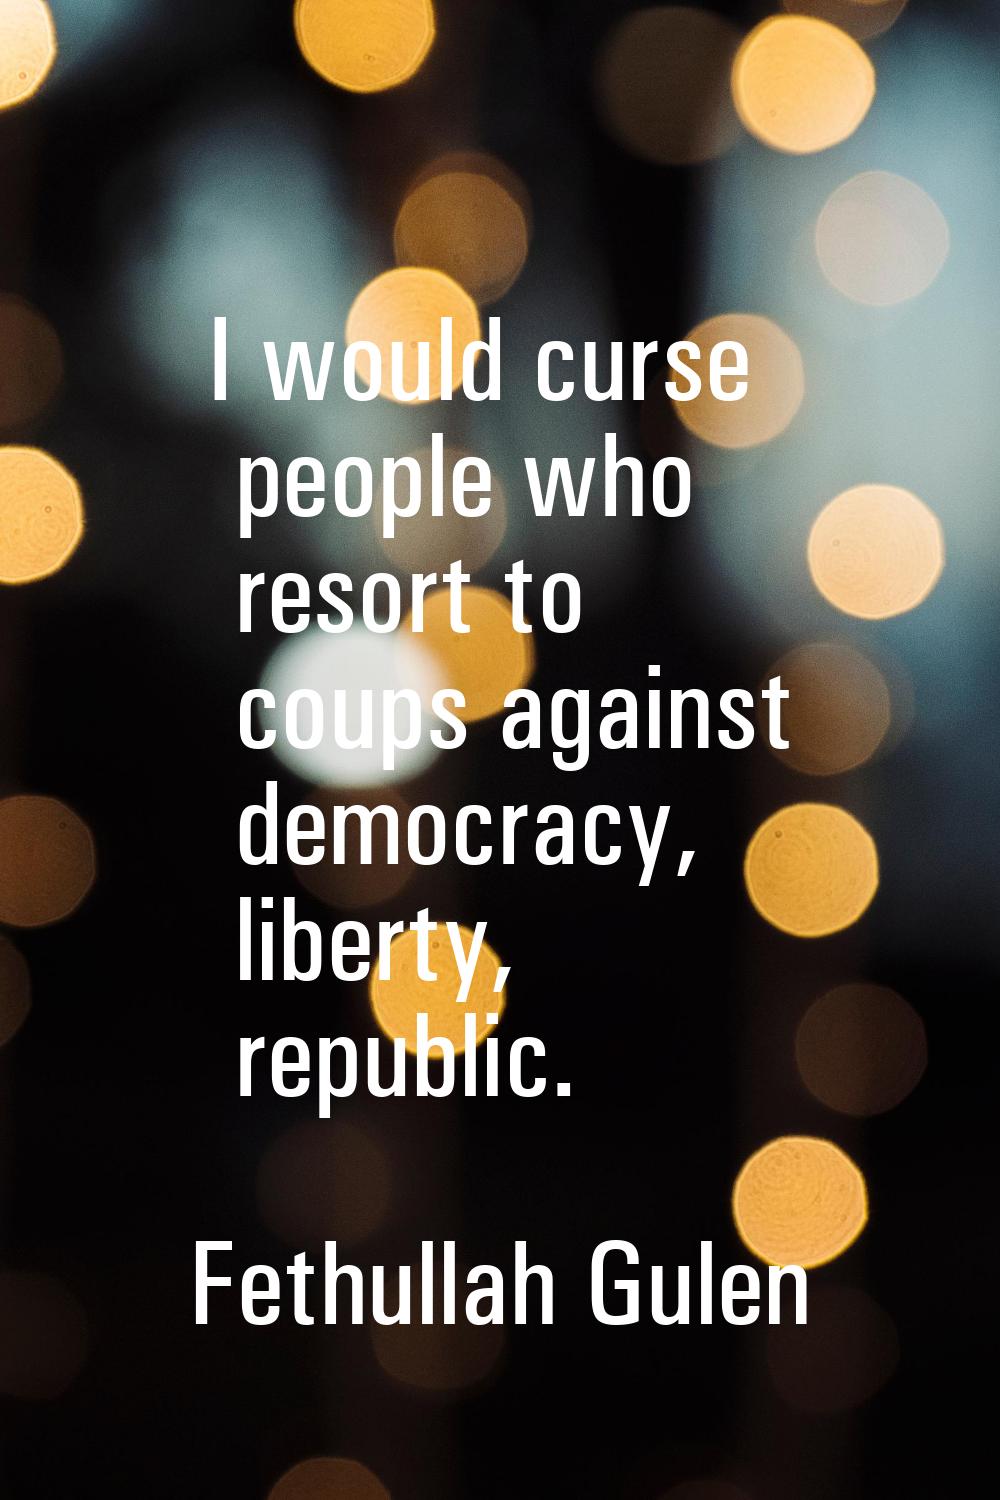 I would curse people who resort to coups against democracy, liberty, republic.